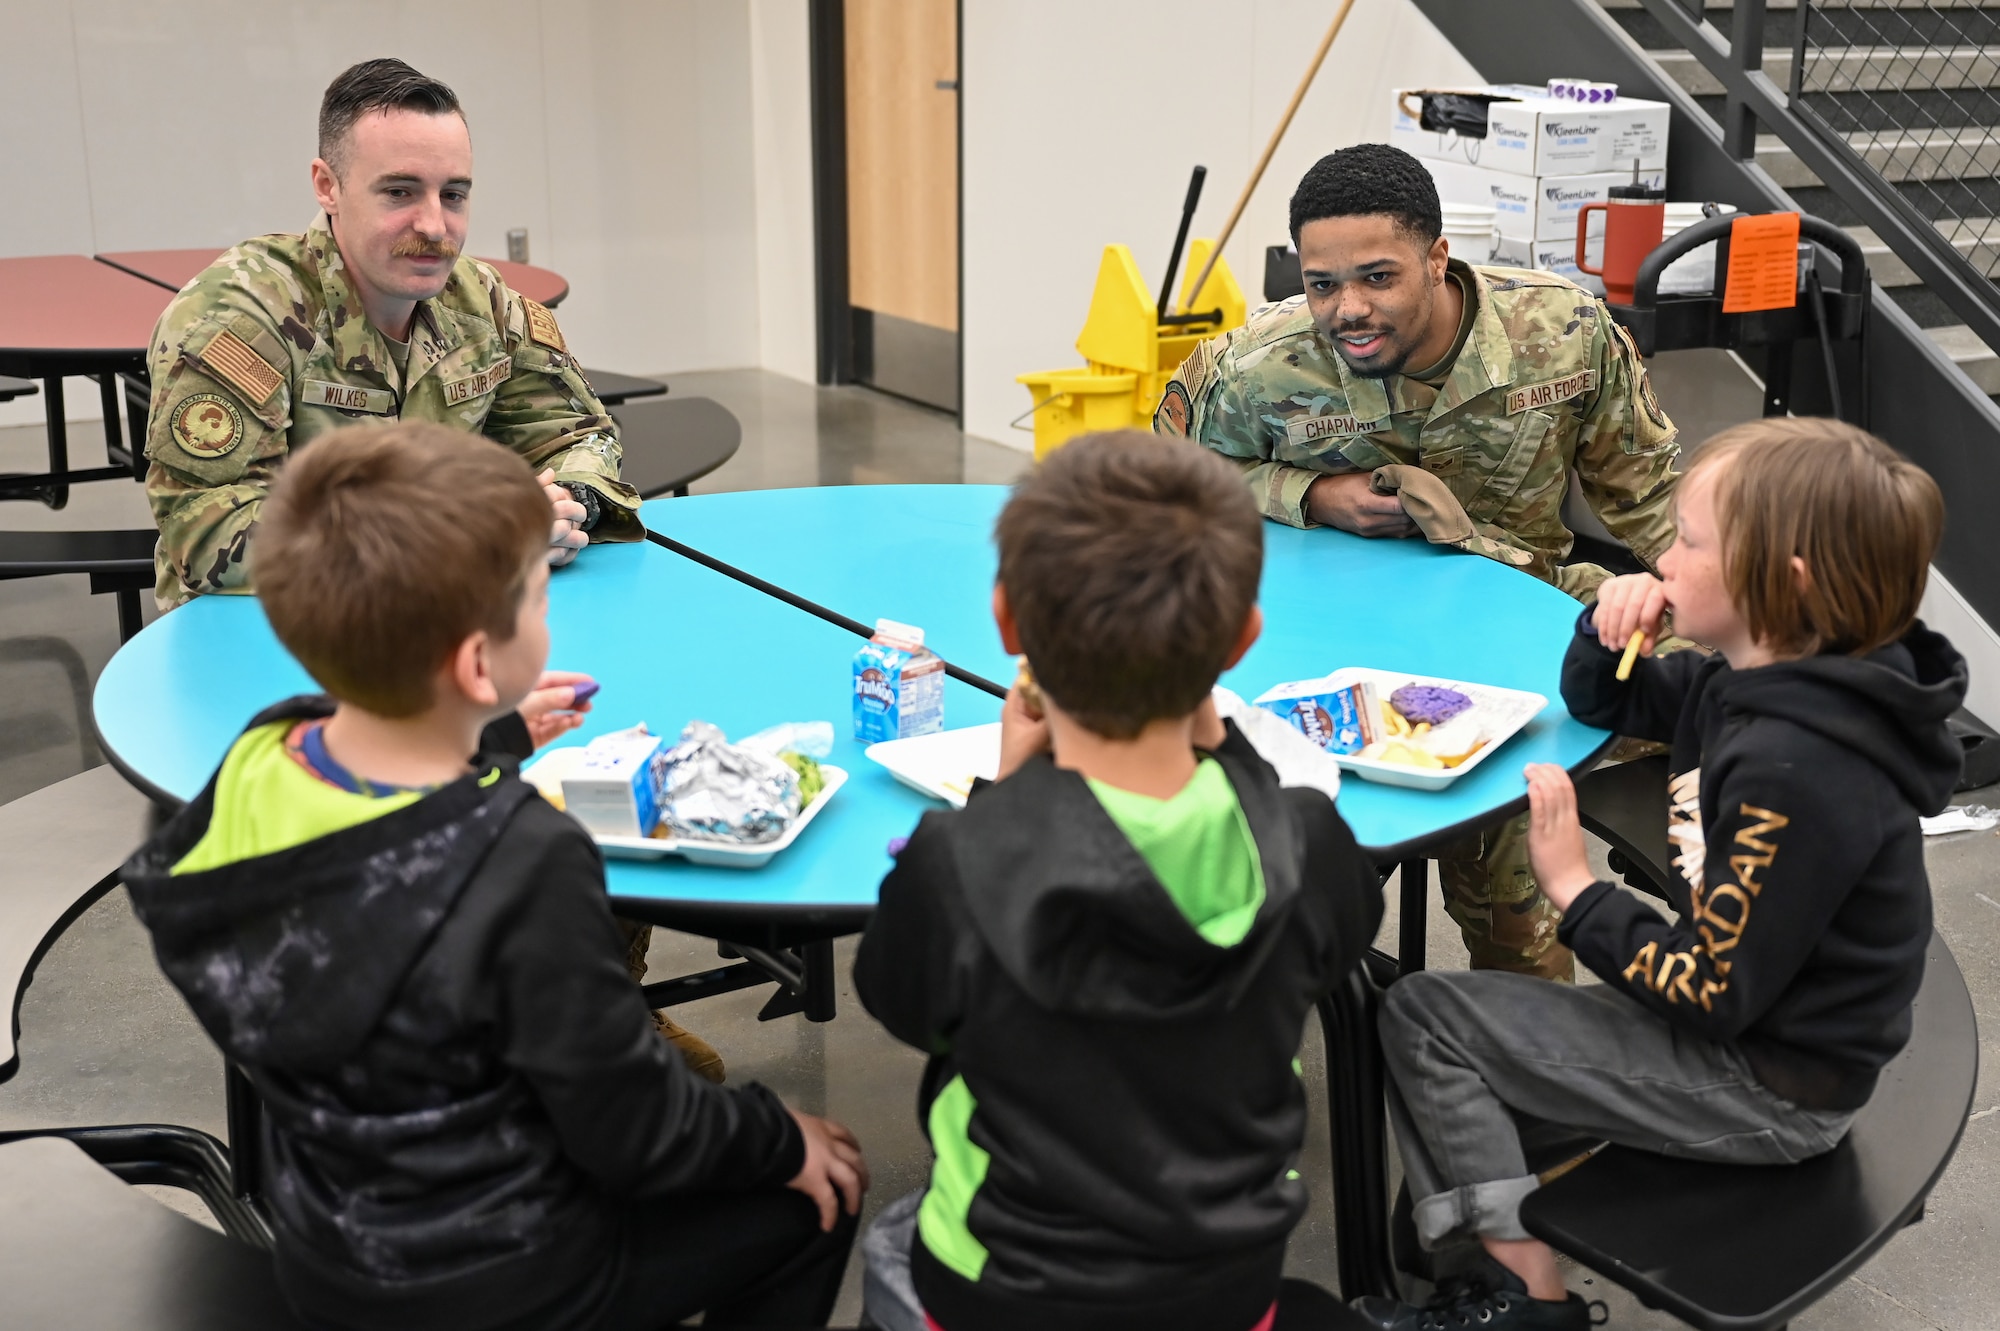 Senior Airman Blake Wilkes, 309th Aircraft Maintenance Group, and  Senior Airman Jalen Chapman, 649th Munitions Squadron, chat with South Clearfield Elementary students April 18, 2023, in Clearfield, Utah. The Airmen visited the school to engage with the community during the Month of the Military Child. (U.S. Air Force photo by Cynthia Griggs)